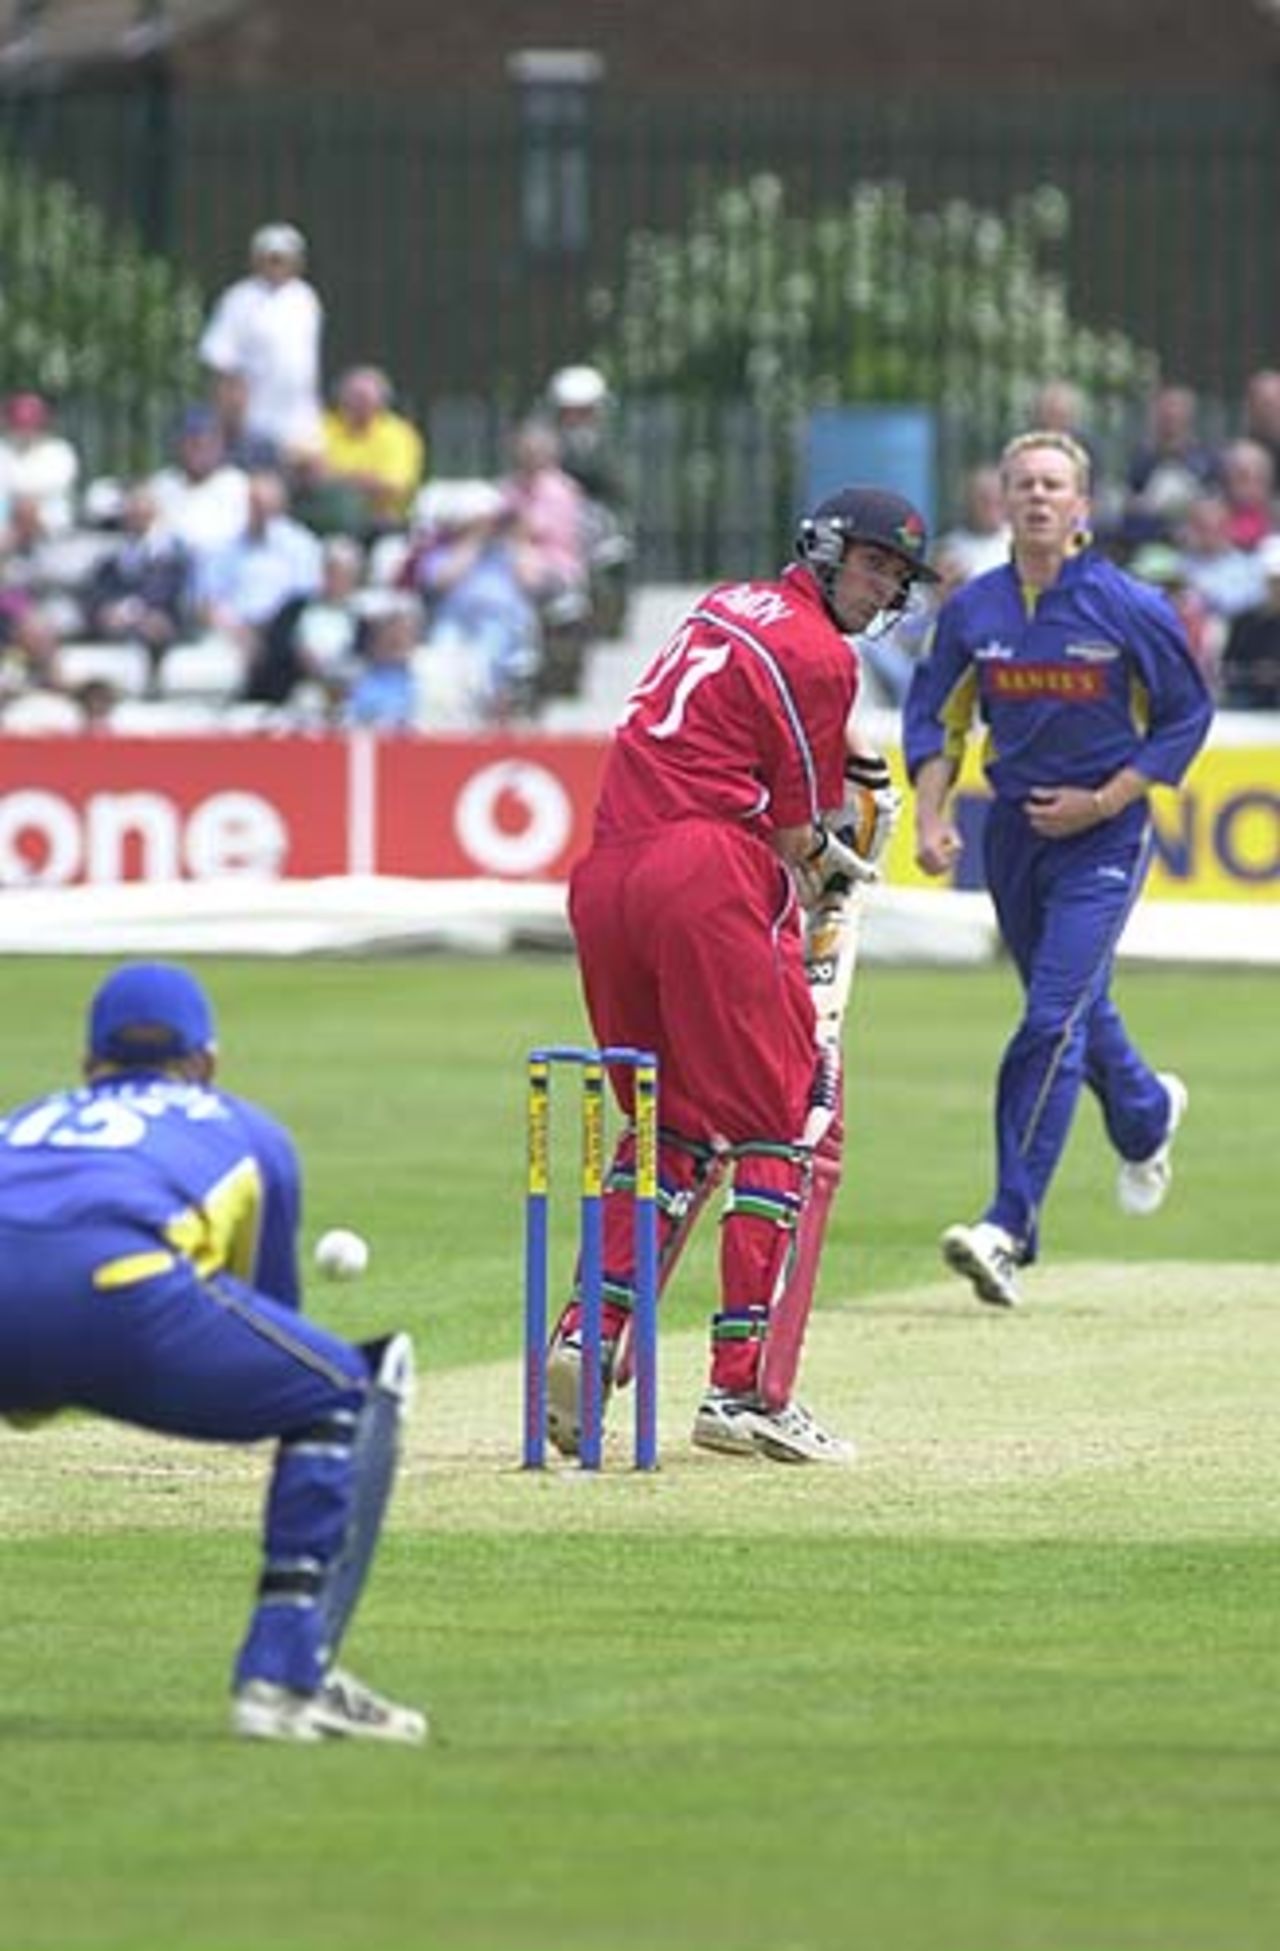 Mark Chilton sees a Kevin Dean delivery miss the outside edge, Derby v Lancashire 23rd June 2002